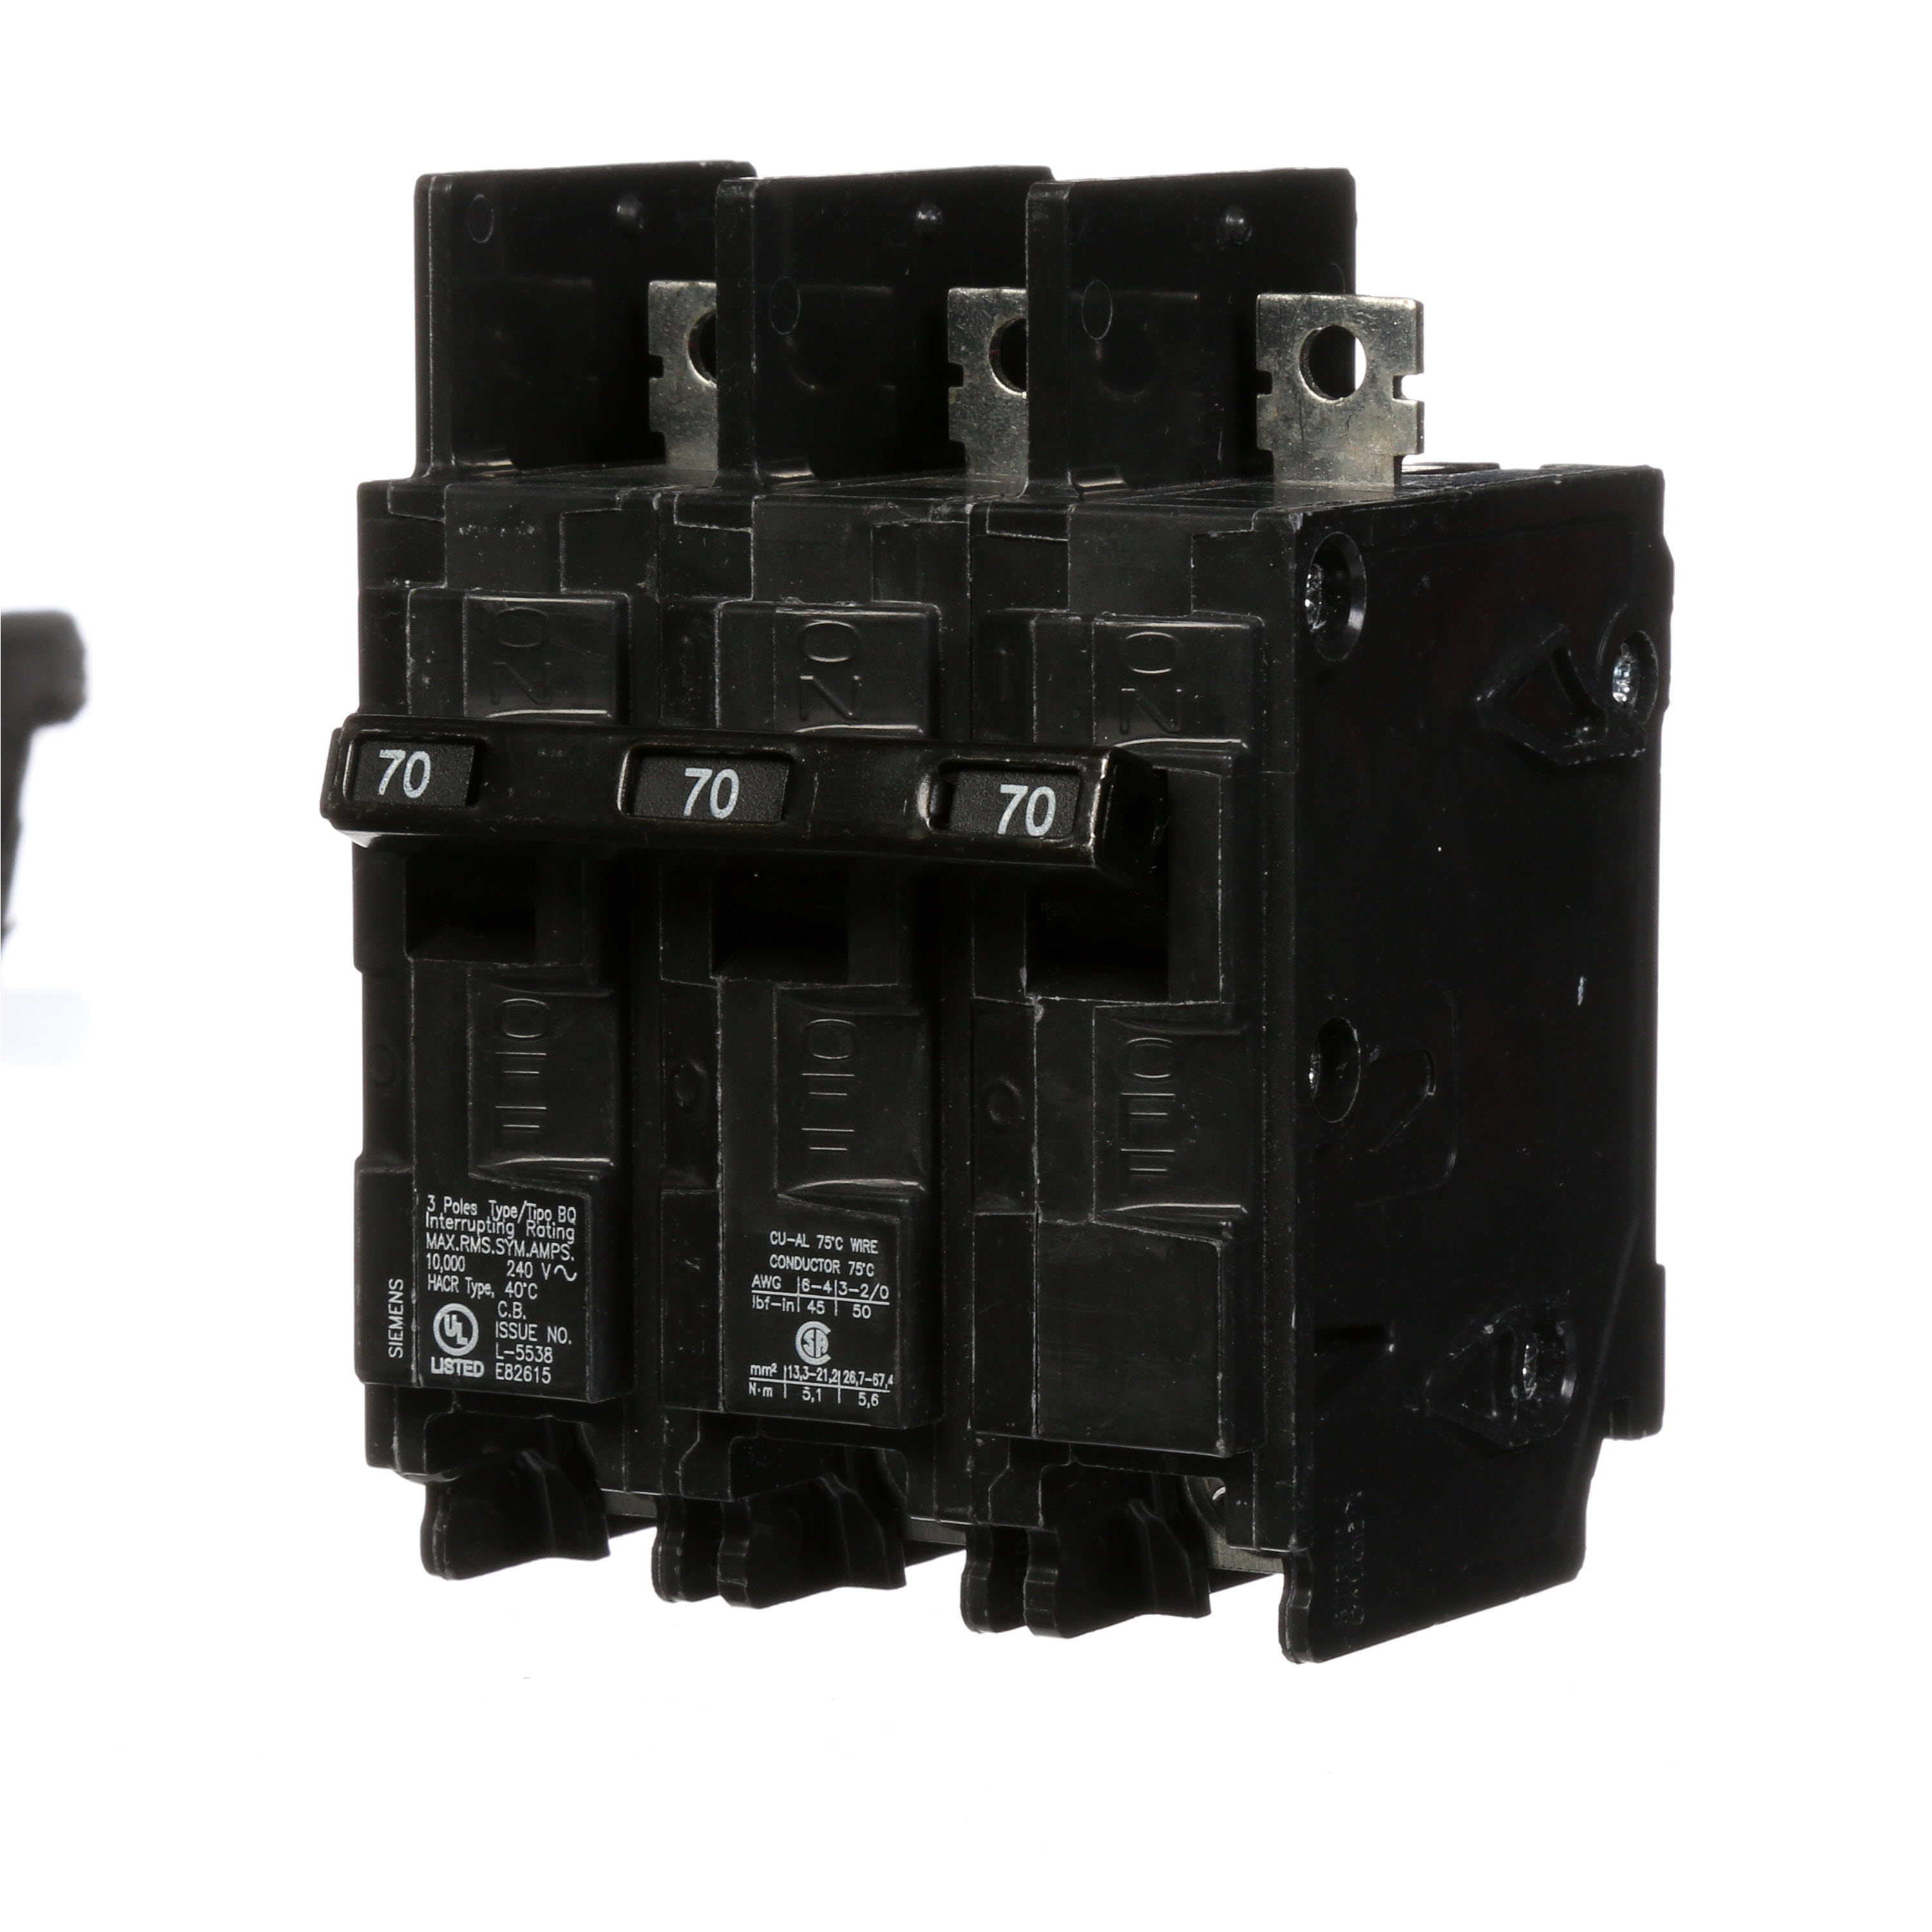 Siemens Low Voltage Molded Case Circuit Breakers General Purpose MCCBs are Circuit Protection Molded Case Circuit Breakers. 3-Pole Common-Trip circuit breaker type BQ. Rated 240V (070A) (AIR 10 kA). Special features Load side lugs are included.